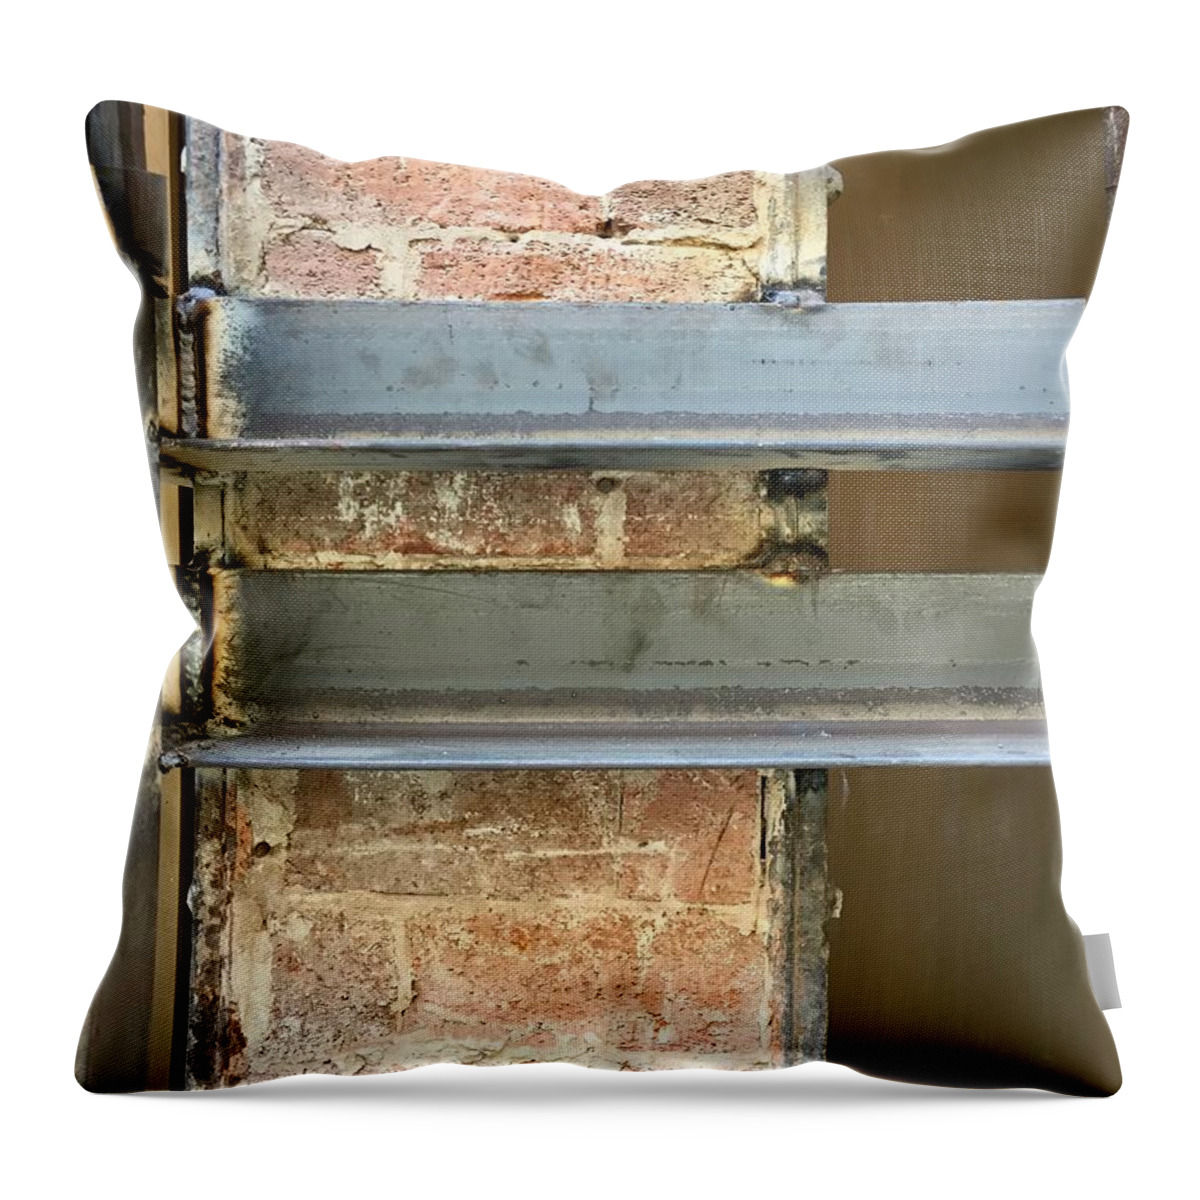 Brick Angle Iron Rough Throw Pillow featuring the photograph Collage Series 1-7 by J Doyne Miller